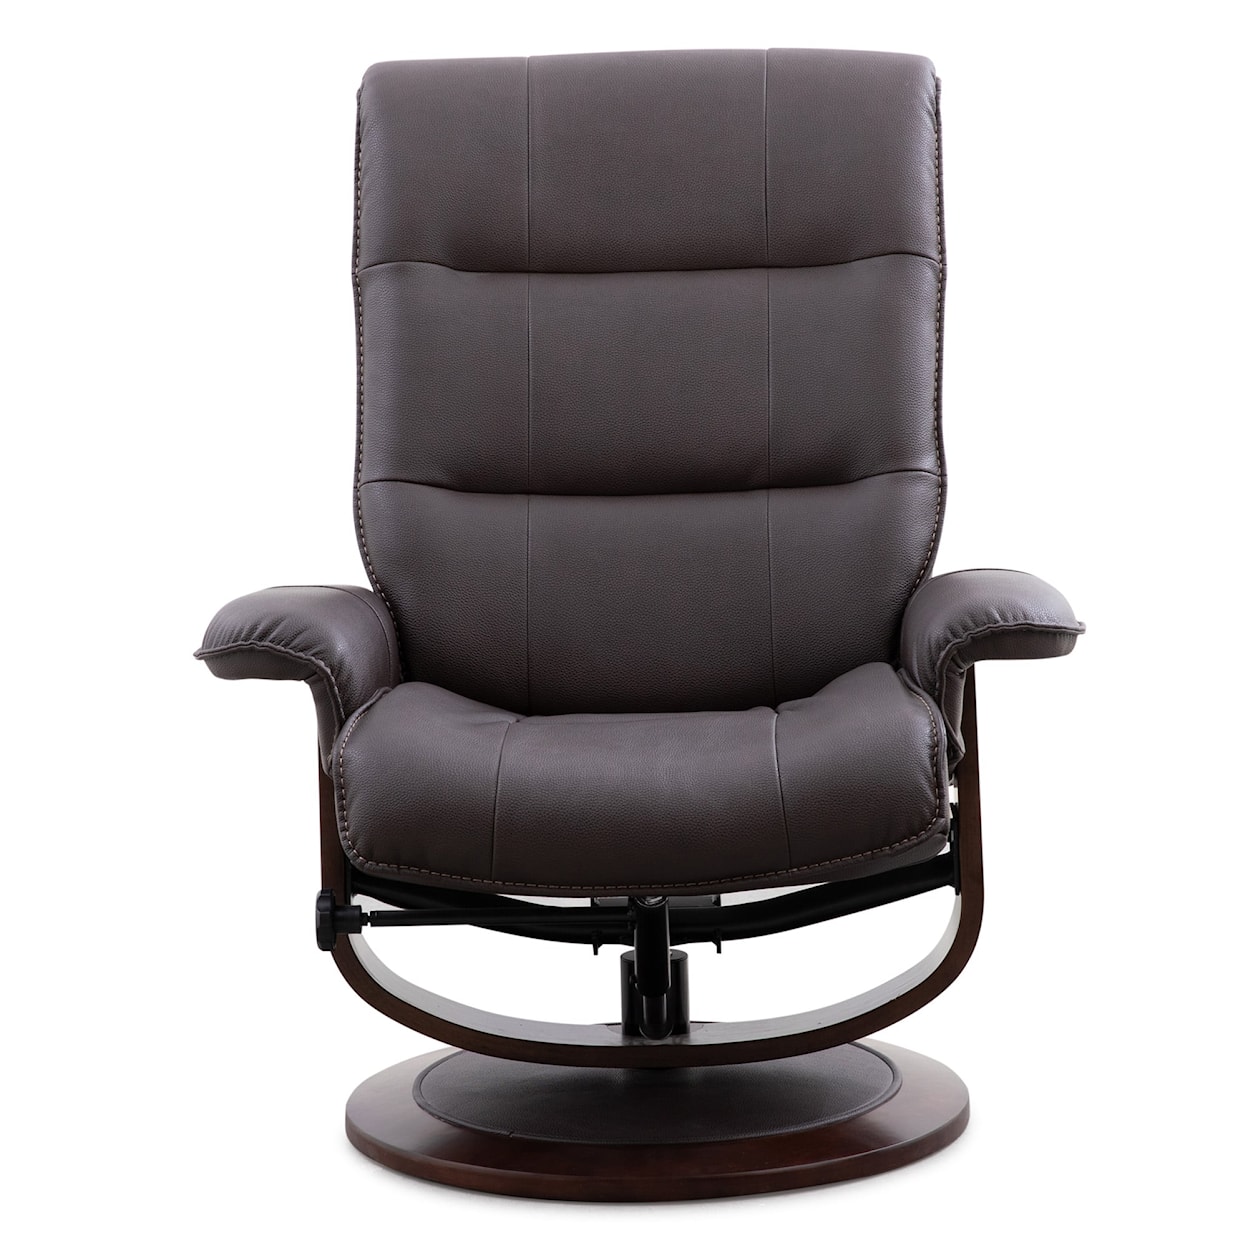 Paramount Living Knight Manual Reclining Swivel Chair and Ottoman